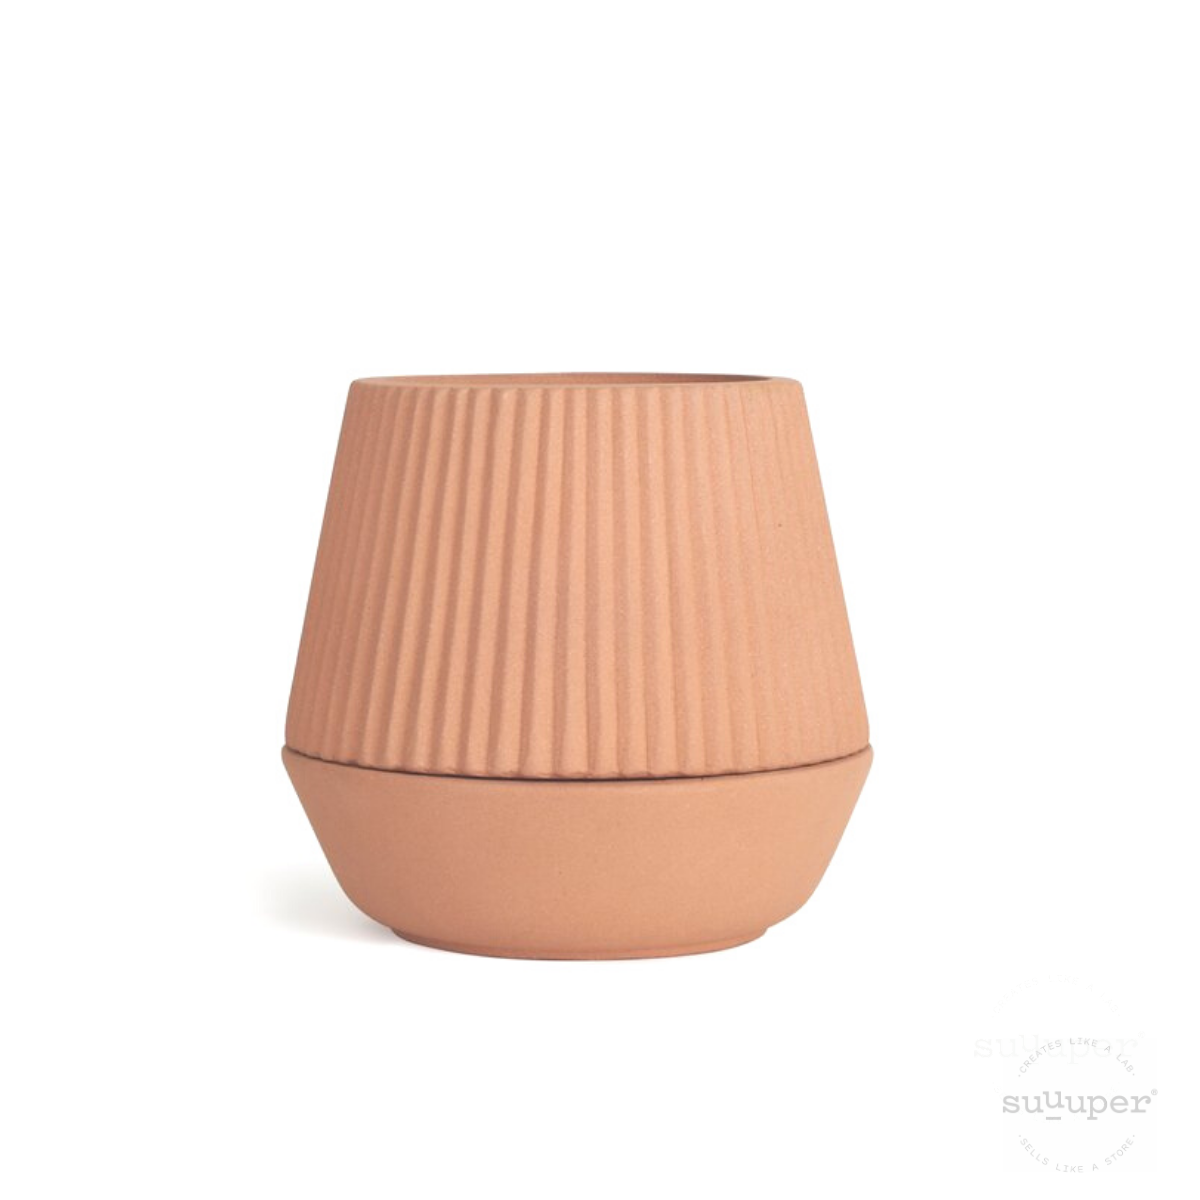 PLEATED PLANTER - Designed by MSDS Studio